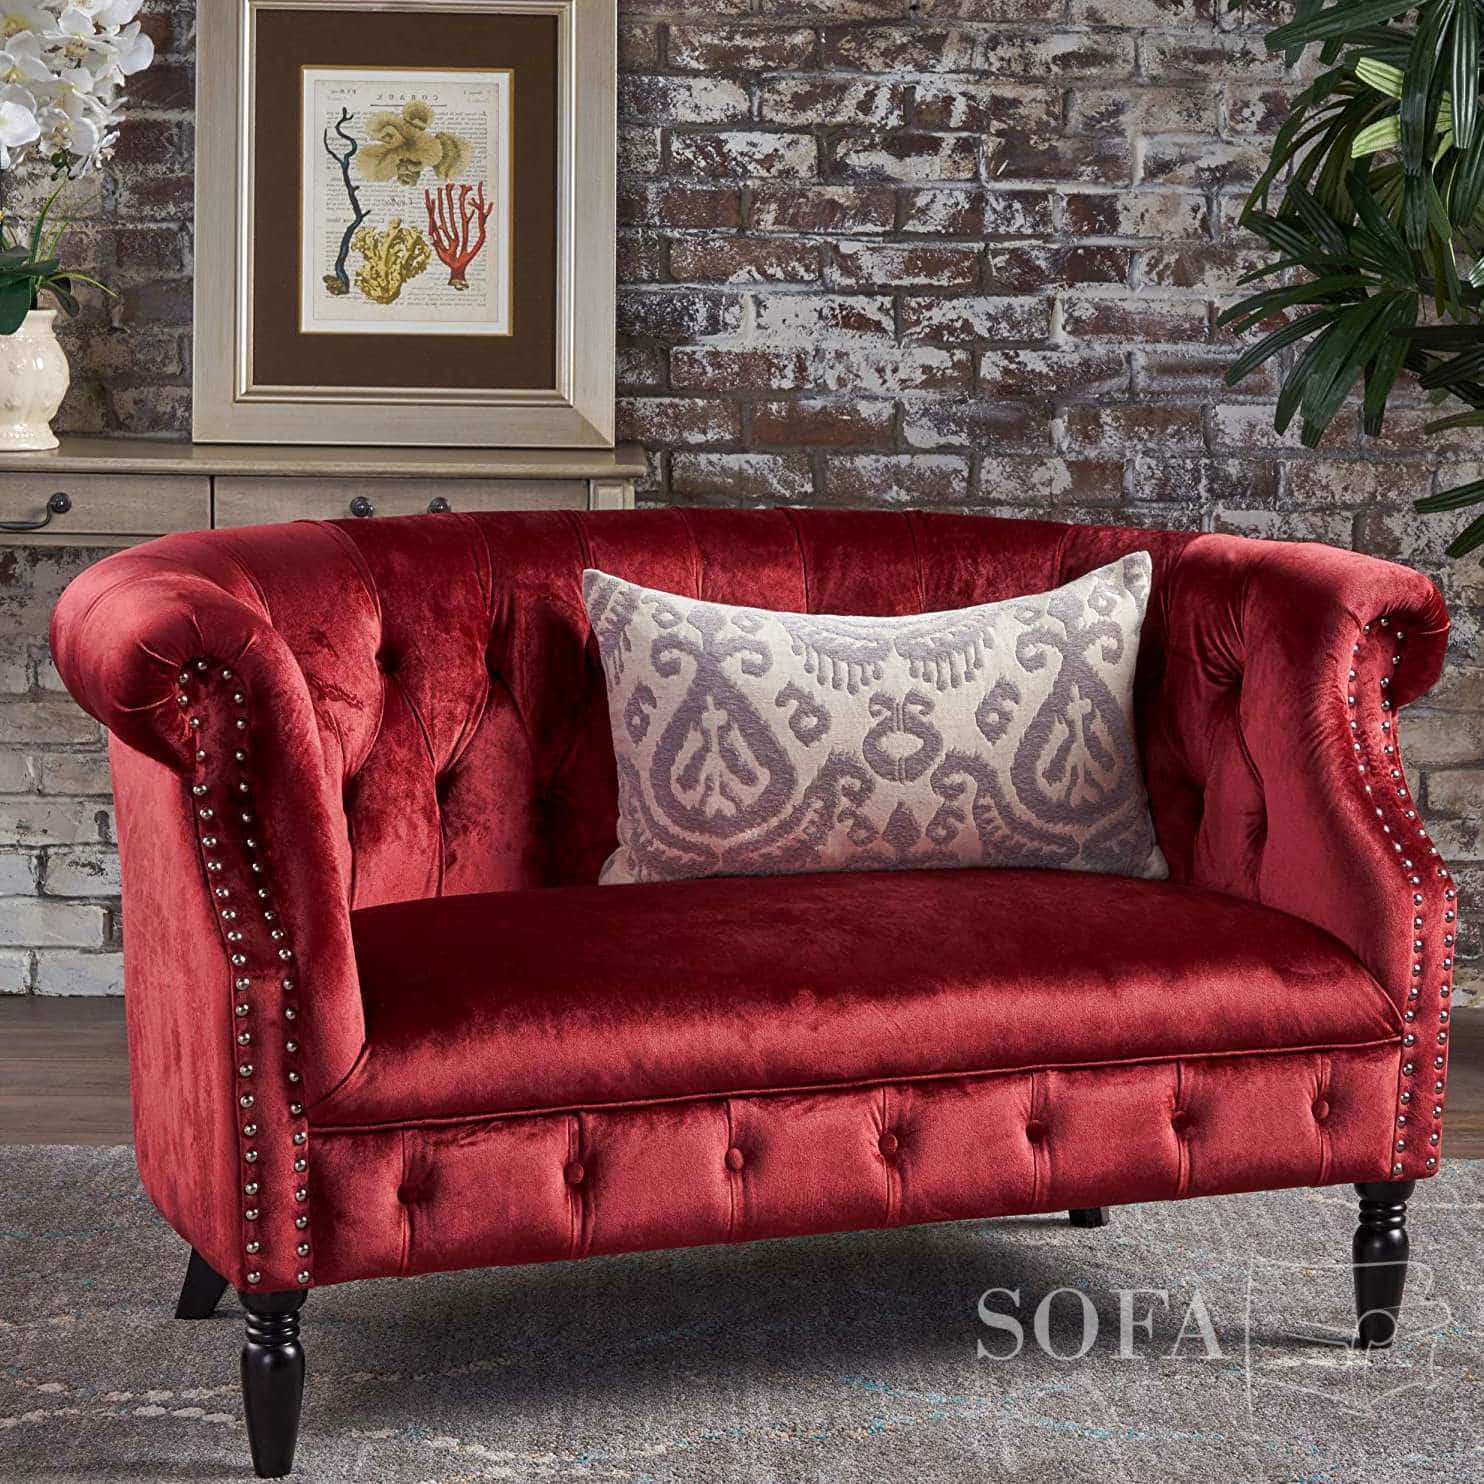 The Best Red Velvet Couches Of 2021 | Sofa Spring